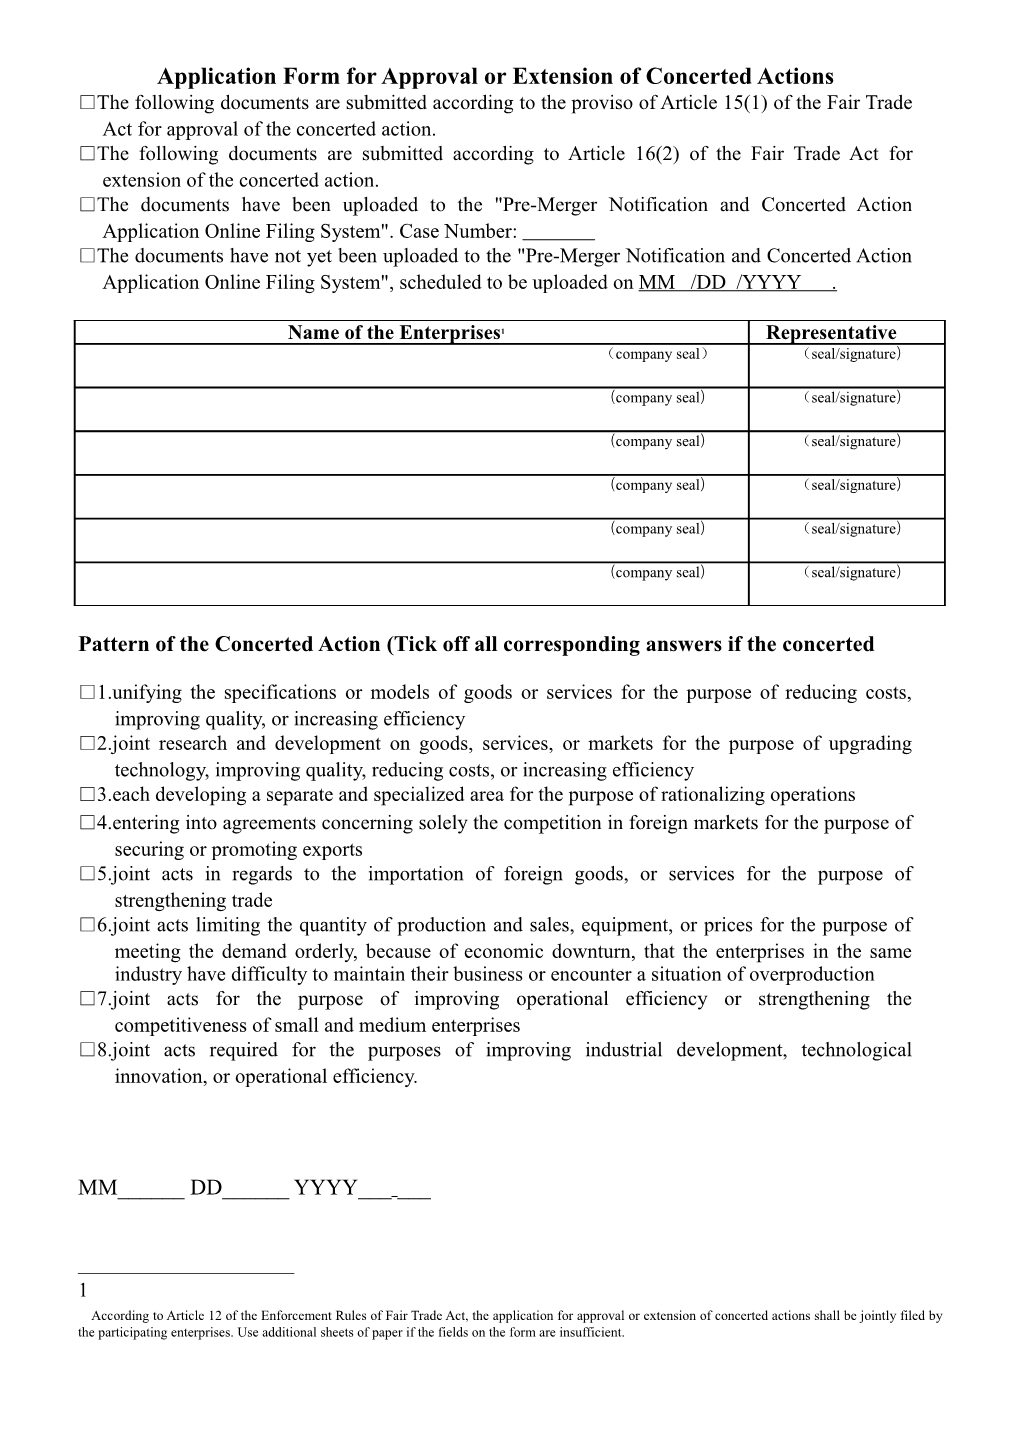 Application Form for Approval Or Extension of Concerted Actions